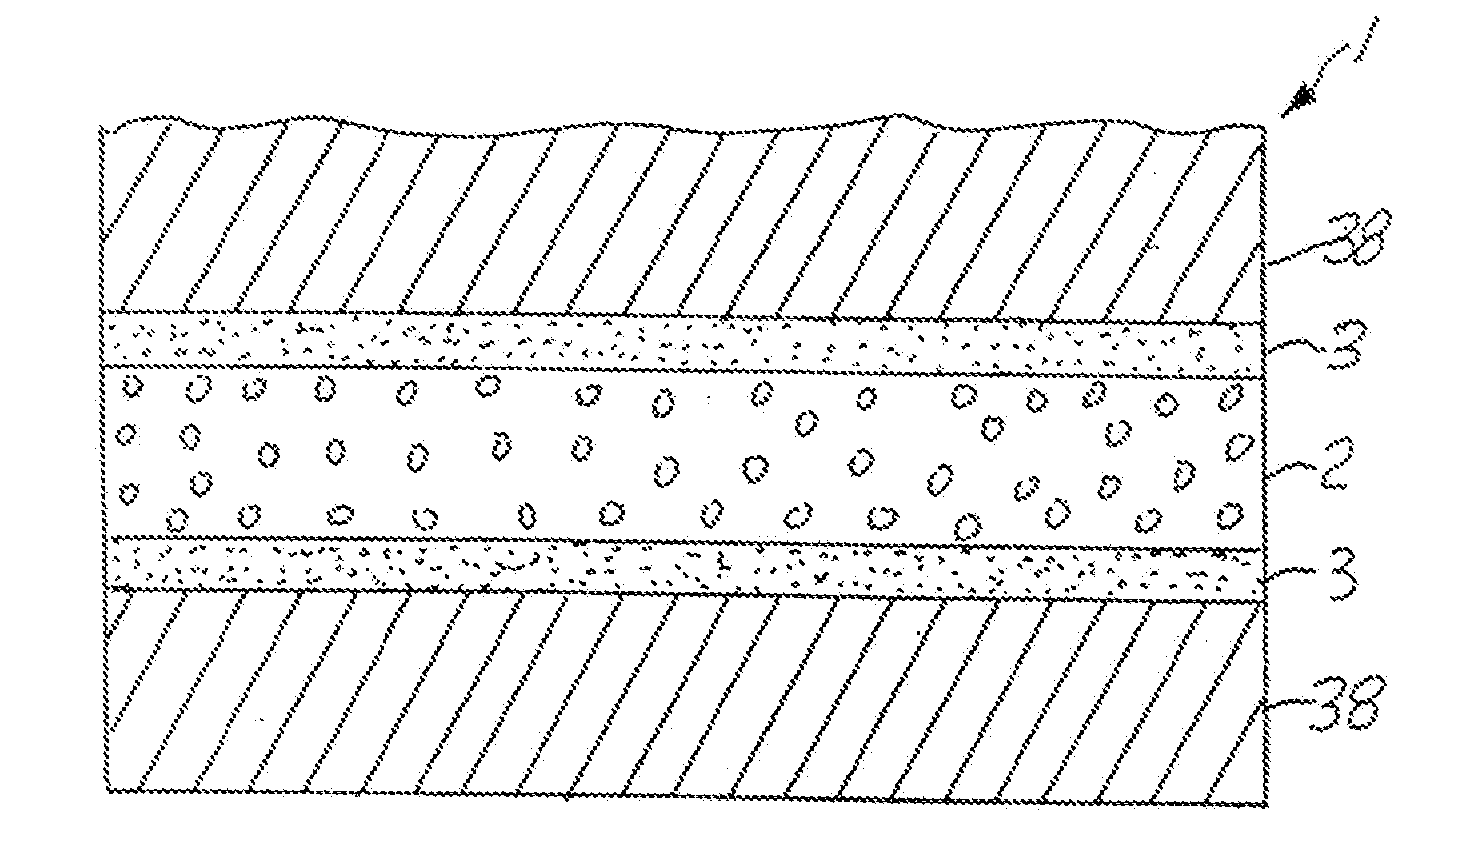 Transparent conductive articles and methods of making same